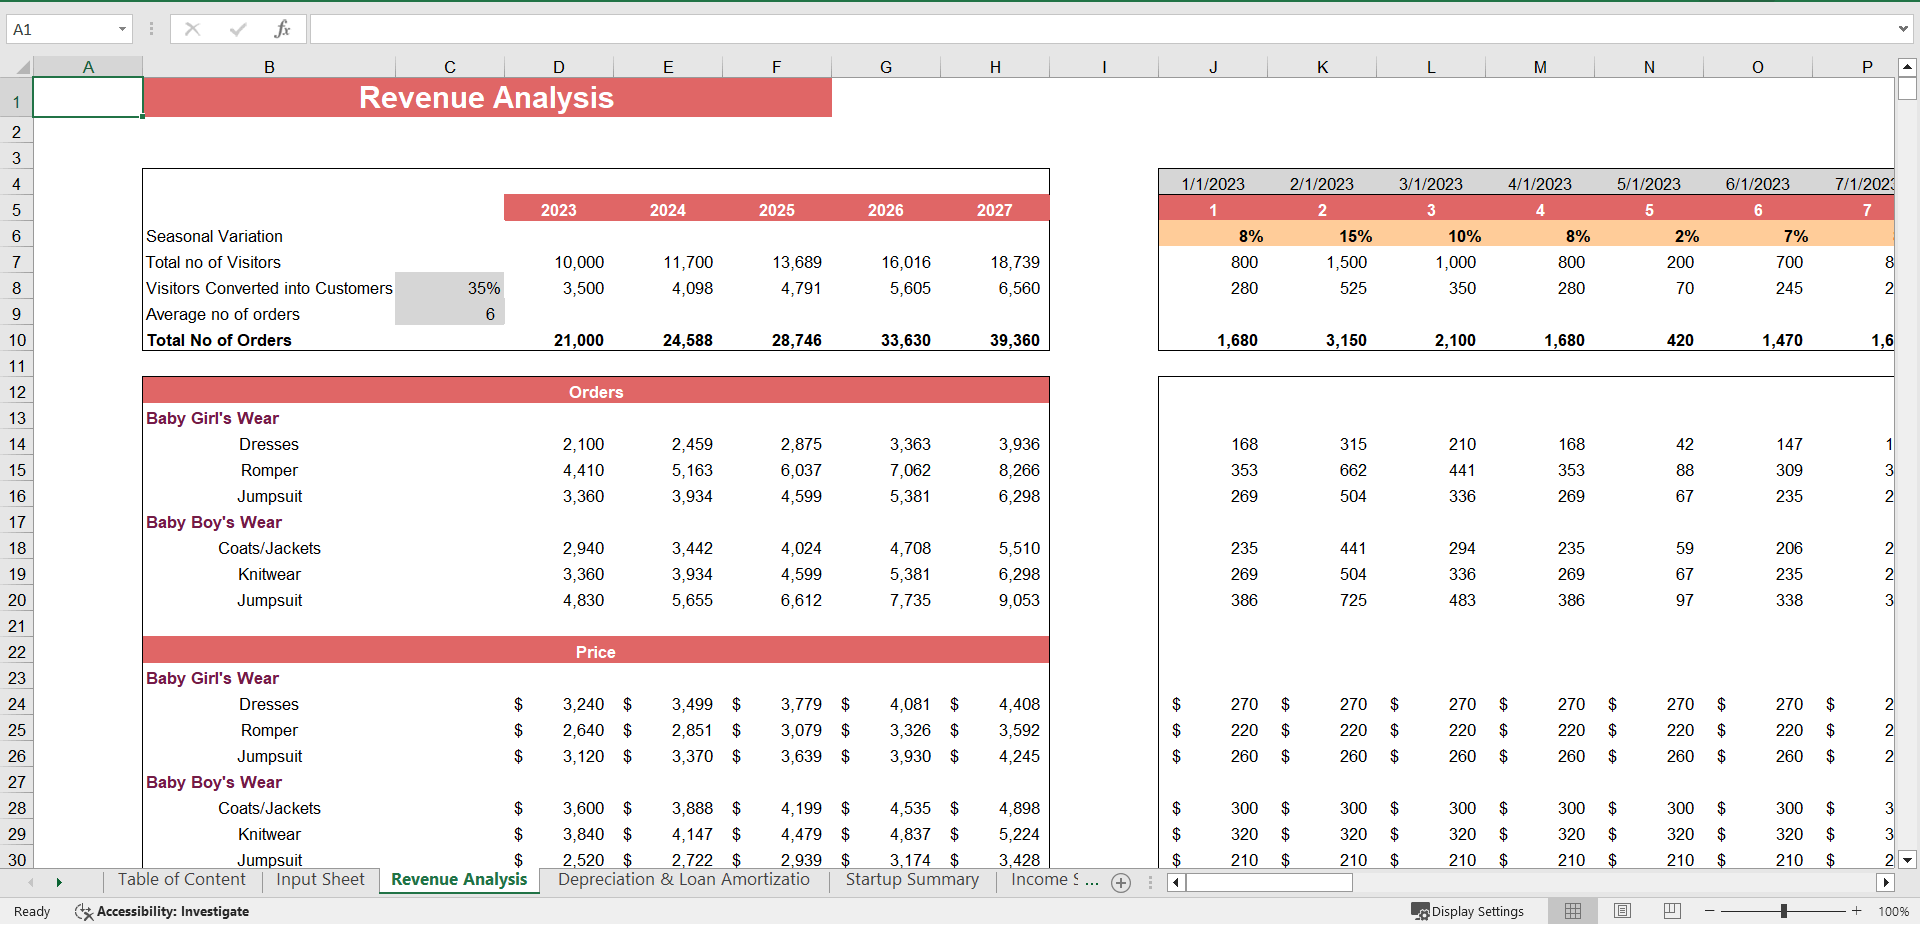 Baby Clothing Store Excel Financial Model (Excel template (XLSX)) Preview Image